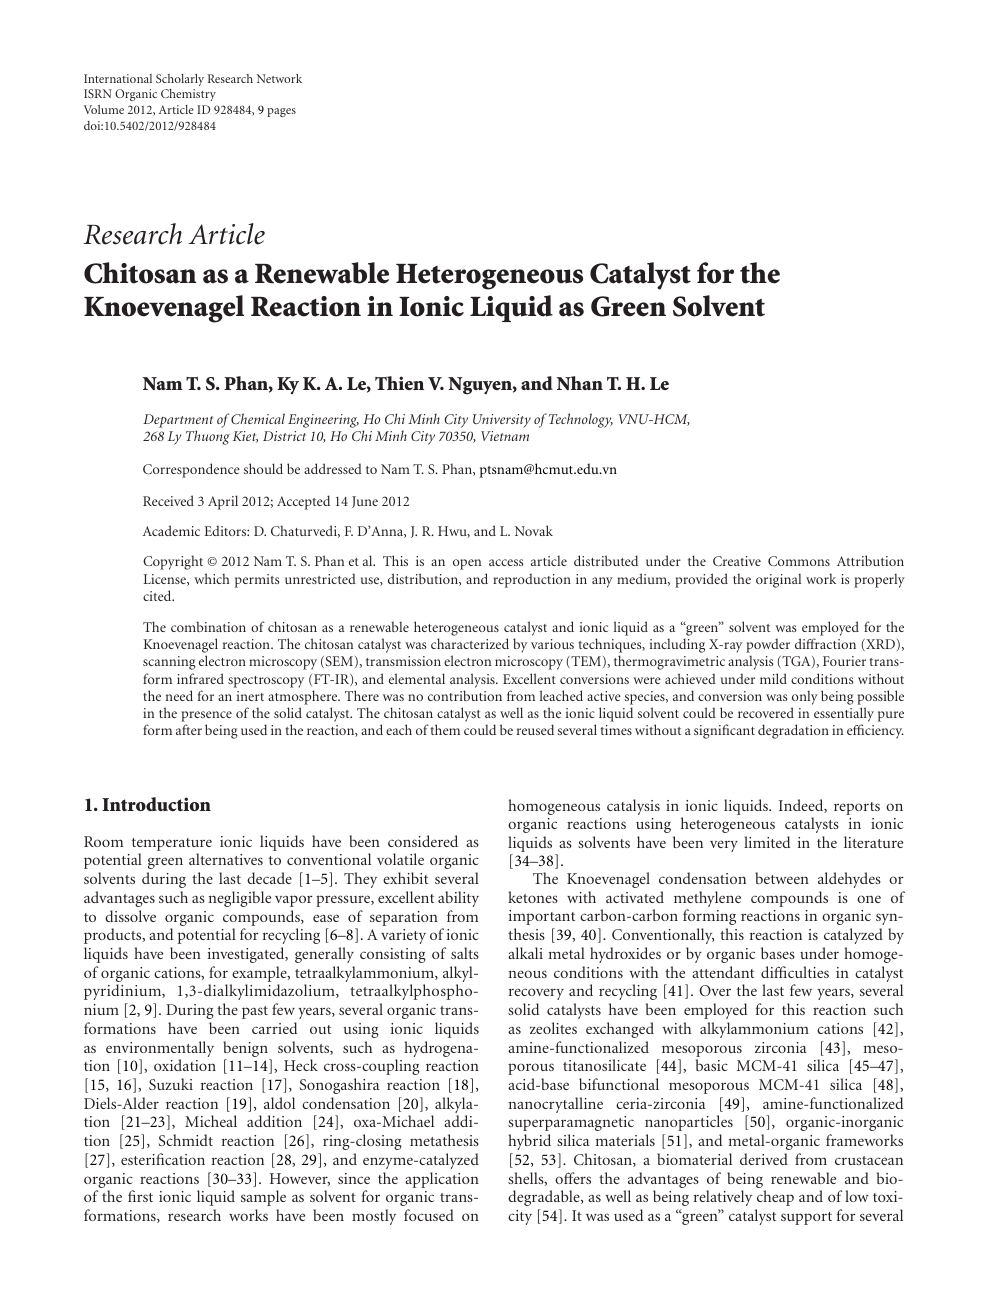 Chitosan As A Renewable Heterogeneous Catalyst For The Knoevenagel Reaction In Ionic Liquid As Green Solvent Topic Of Research Paper In Chemical Sciences Download Scholarly Article Pdf And Read For Free